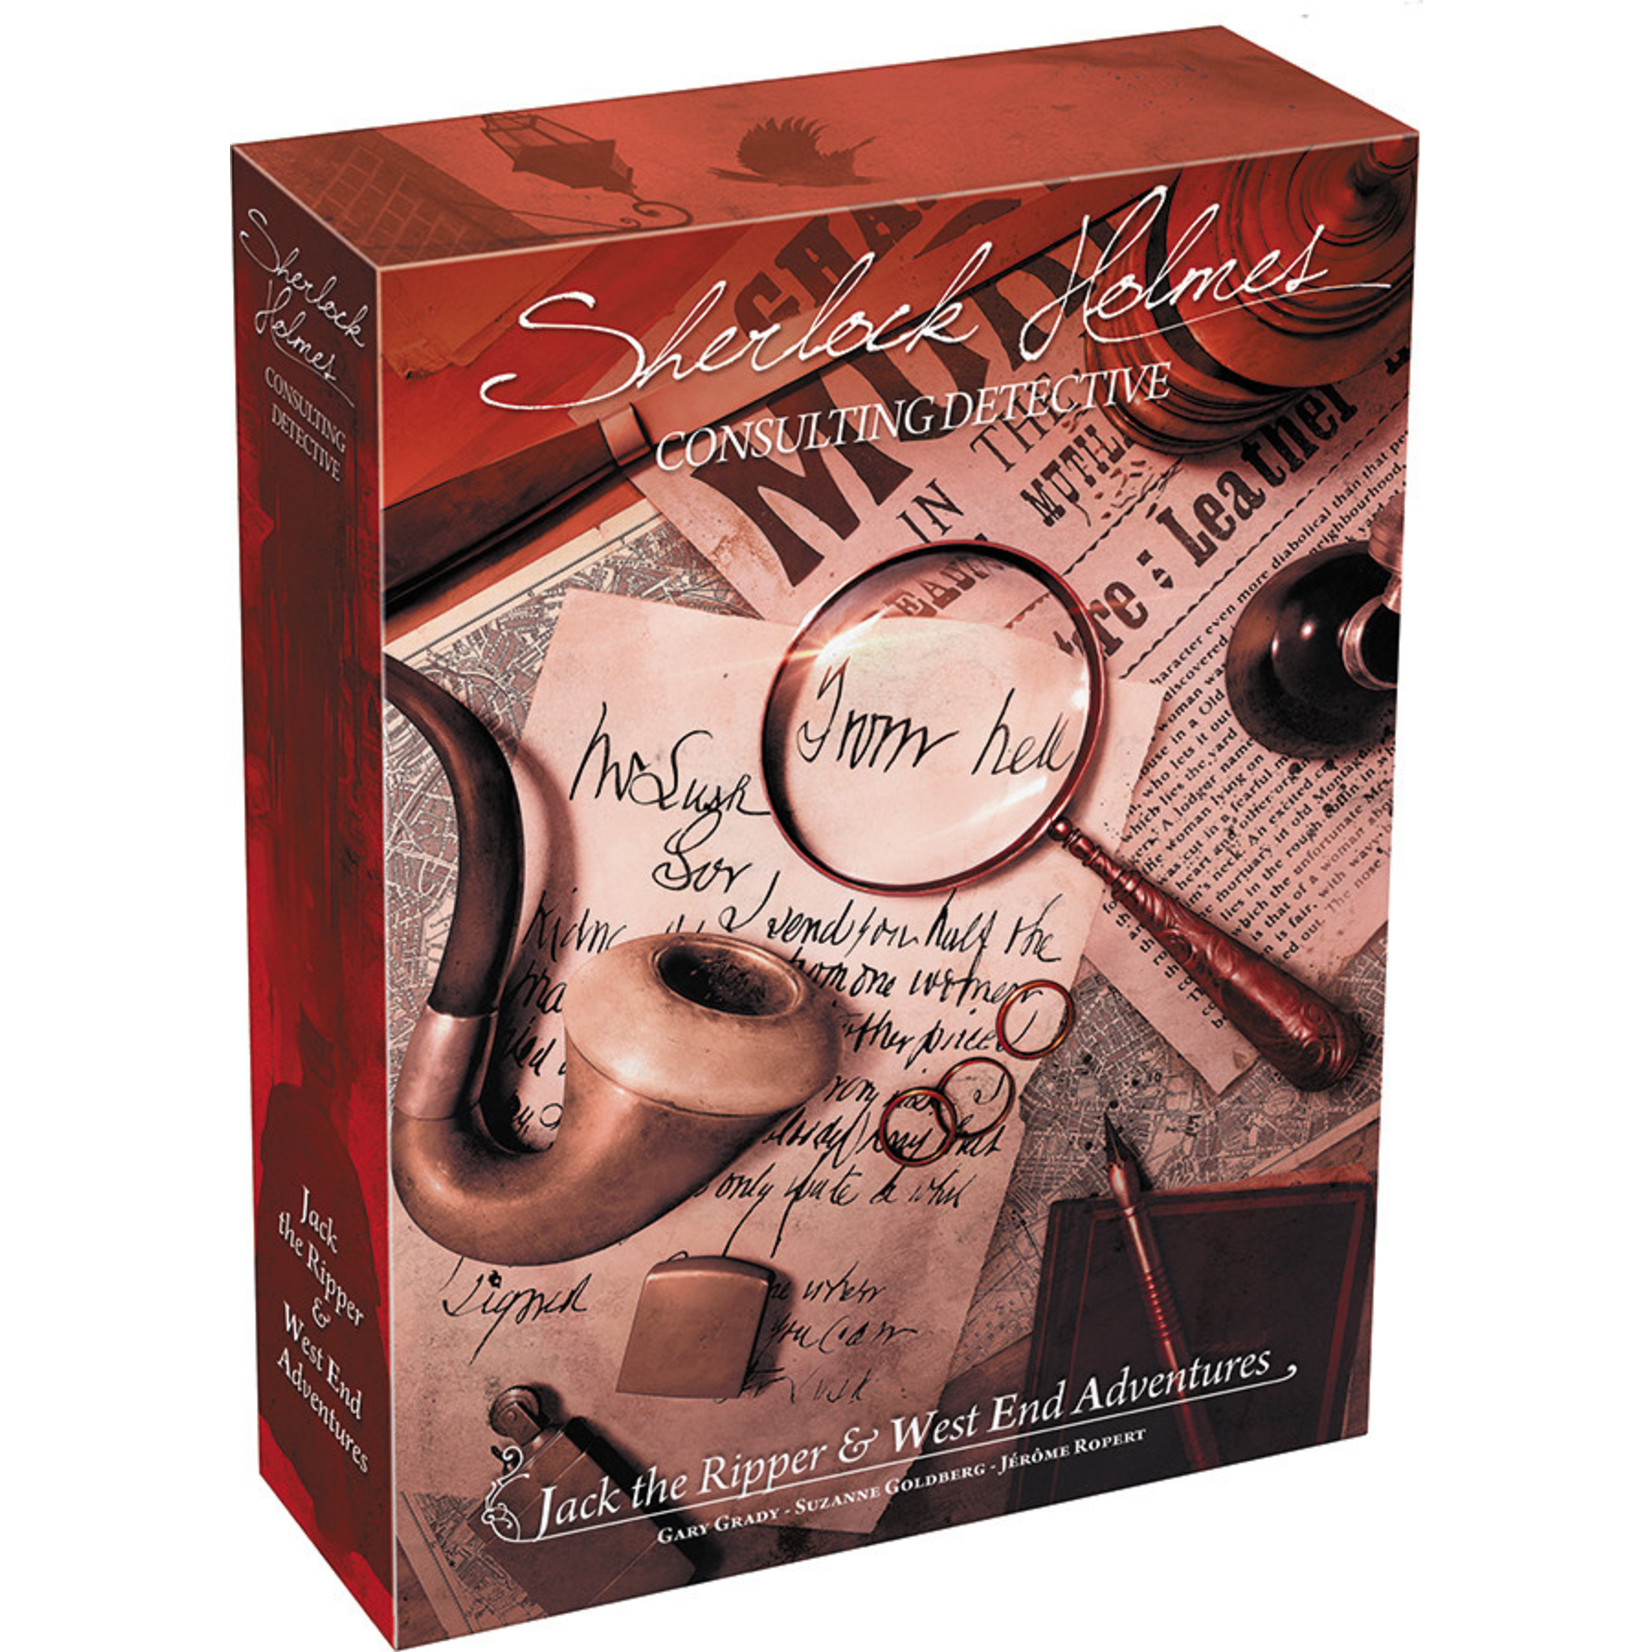 Space Cowboys Sherlock Holmes Consulting Detective: Jack The Ripper and West End Adventures